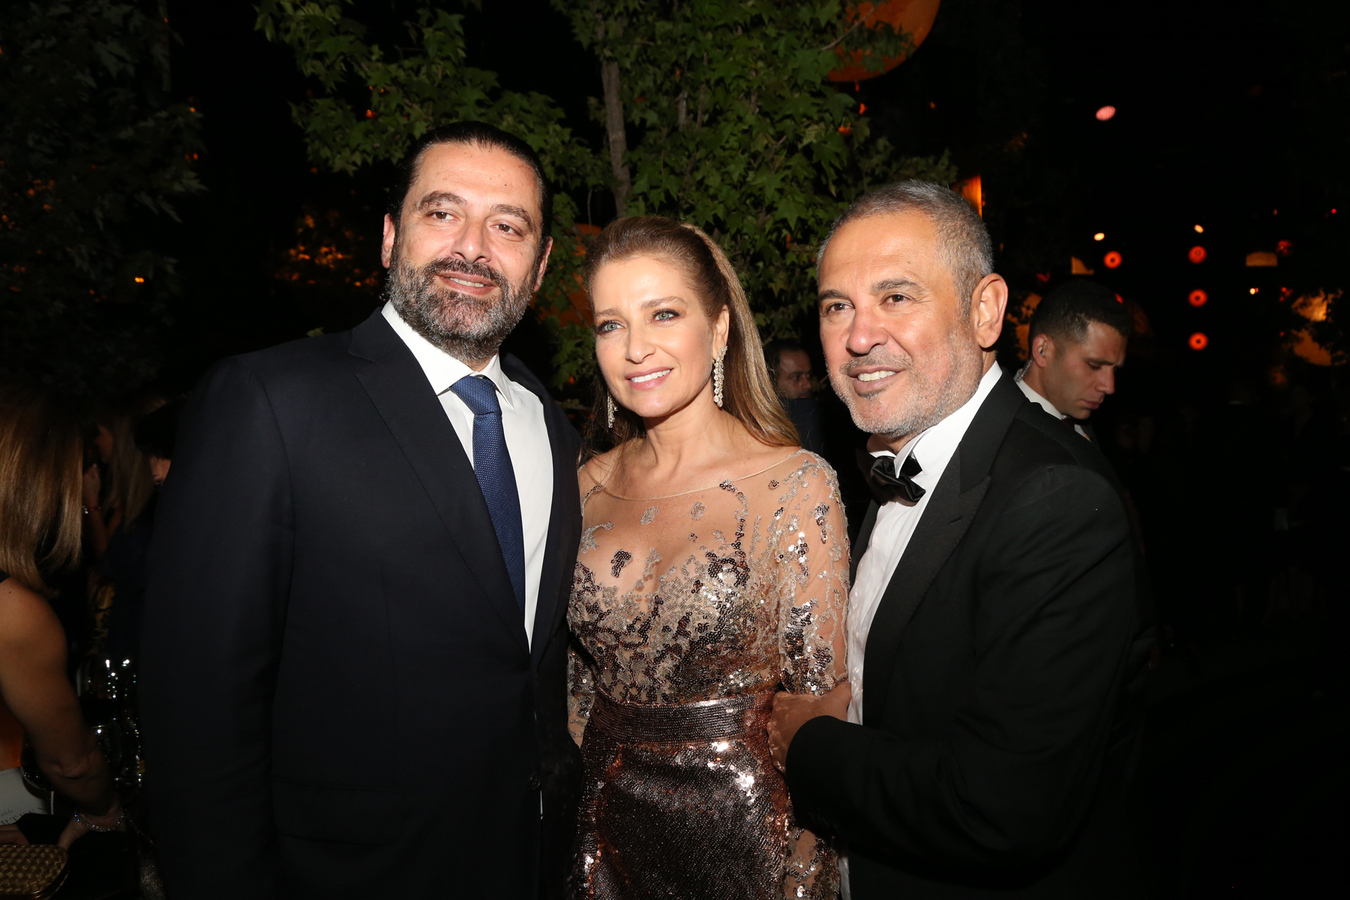 Inside the wedding of Elie Saab Junior and Christina Mourad in